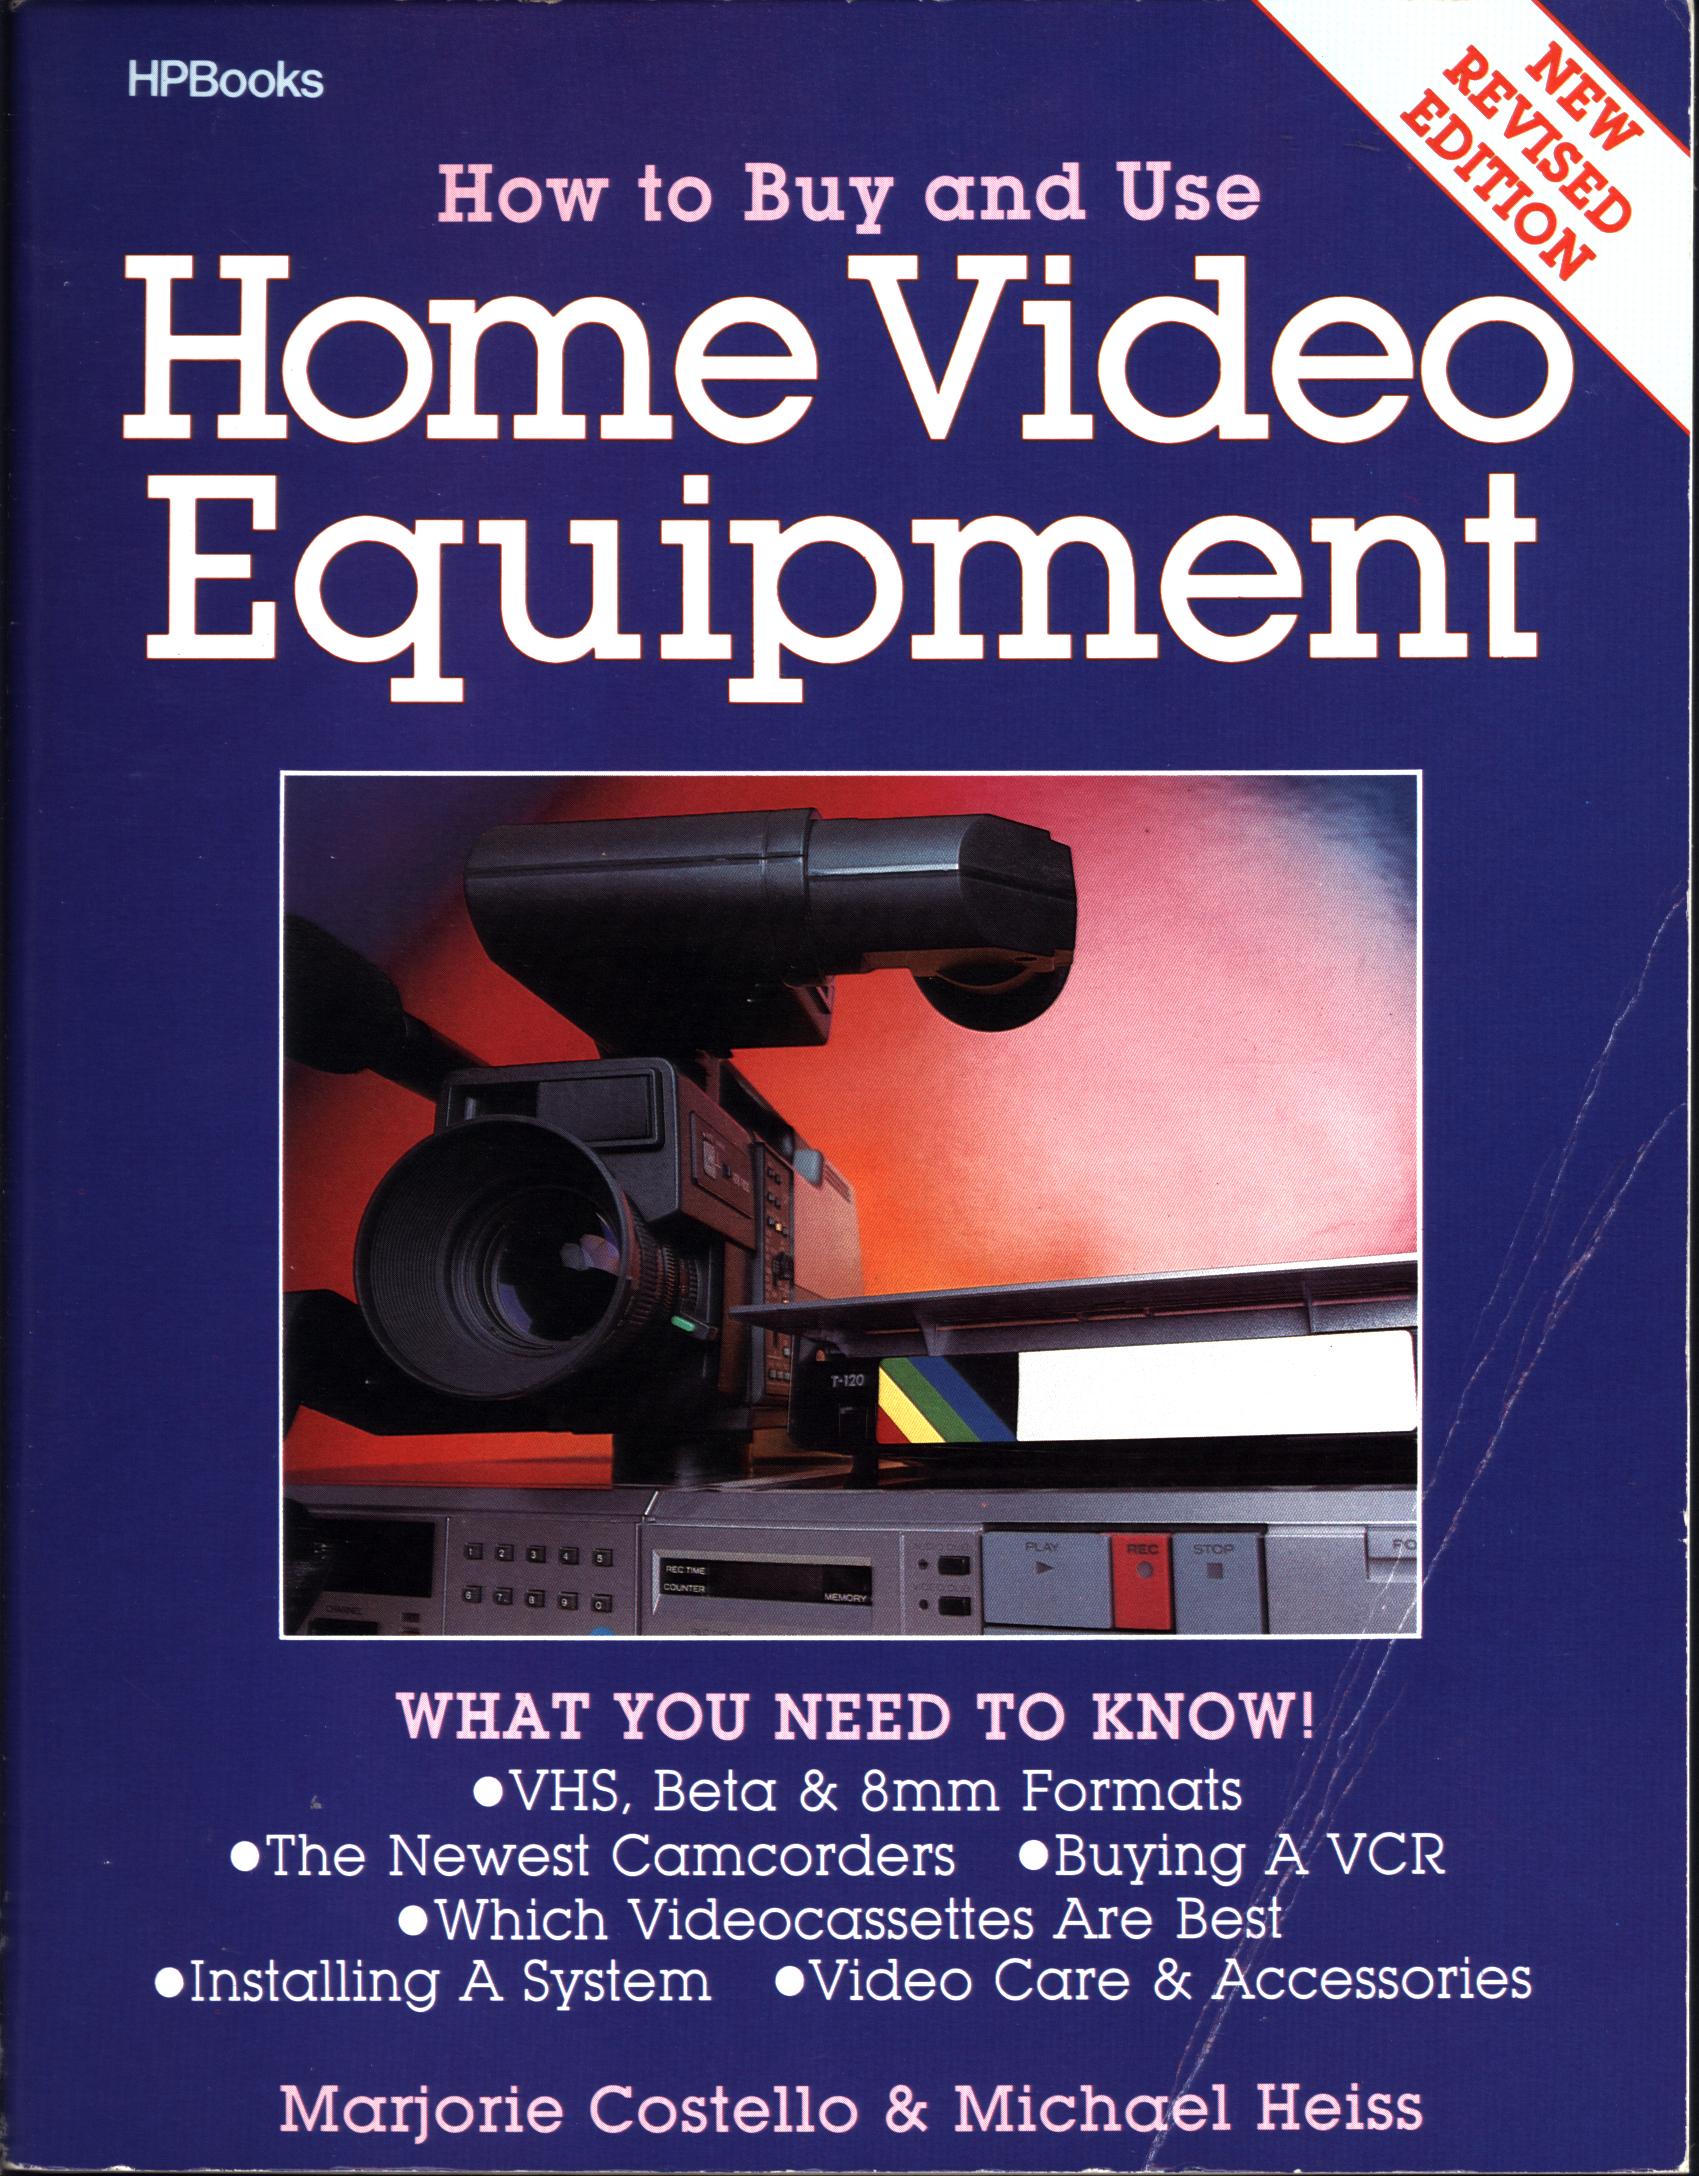 HOW TO BUY AND USE HOME VIDEO EQUIPMENT. 